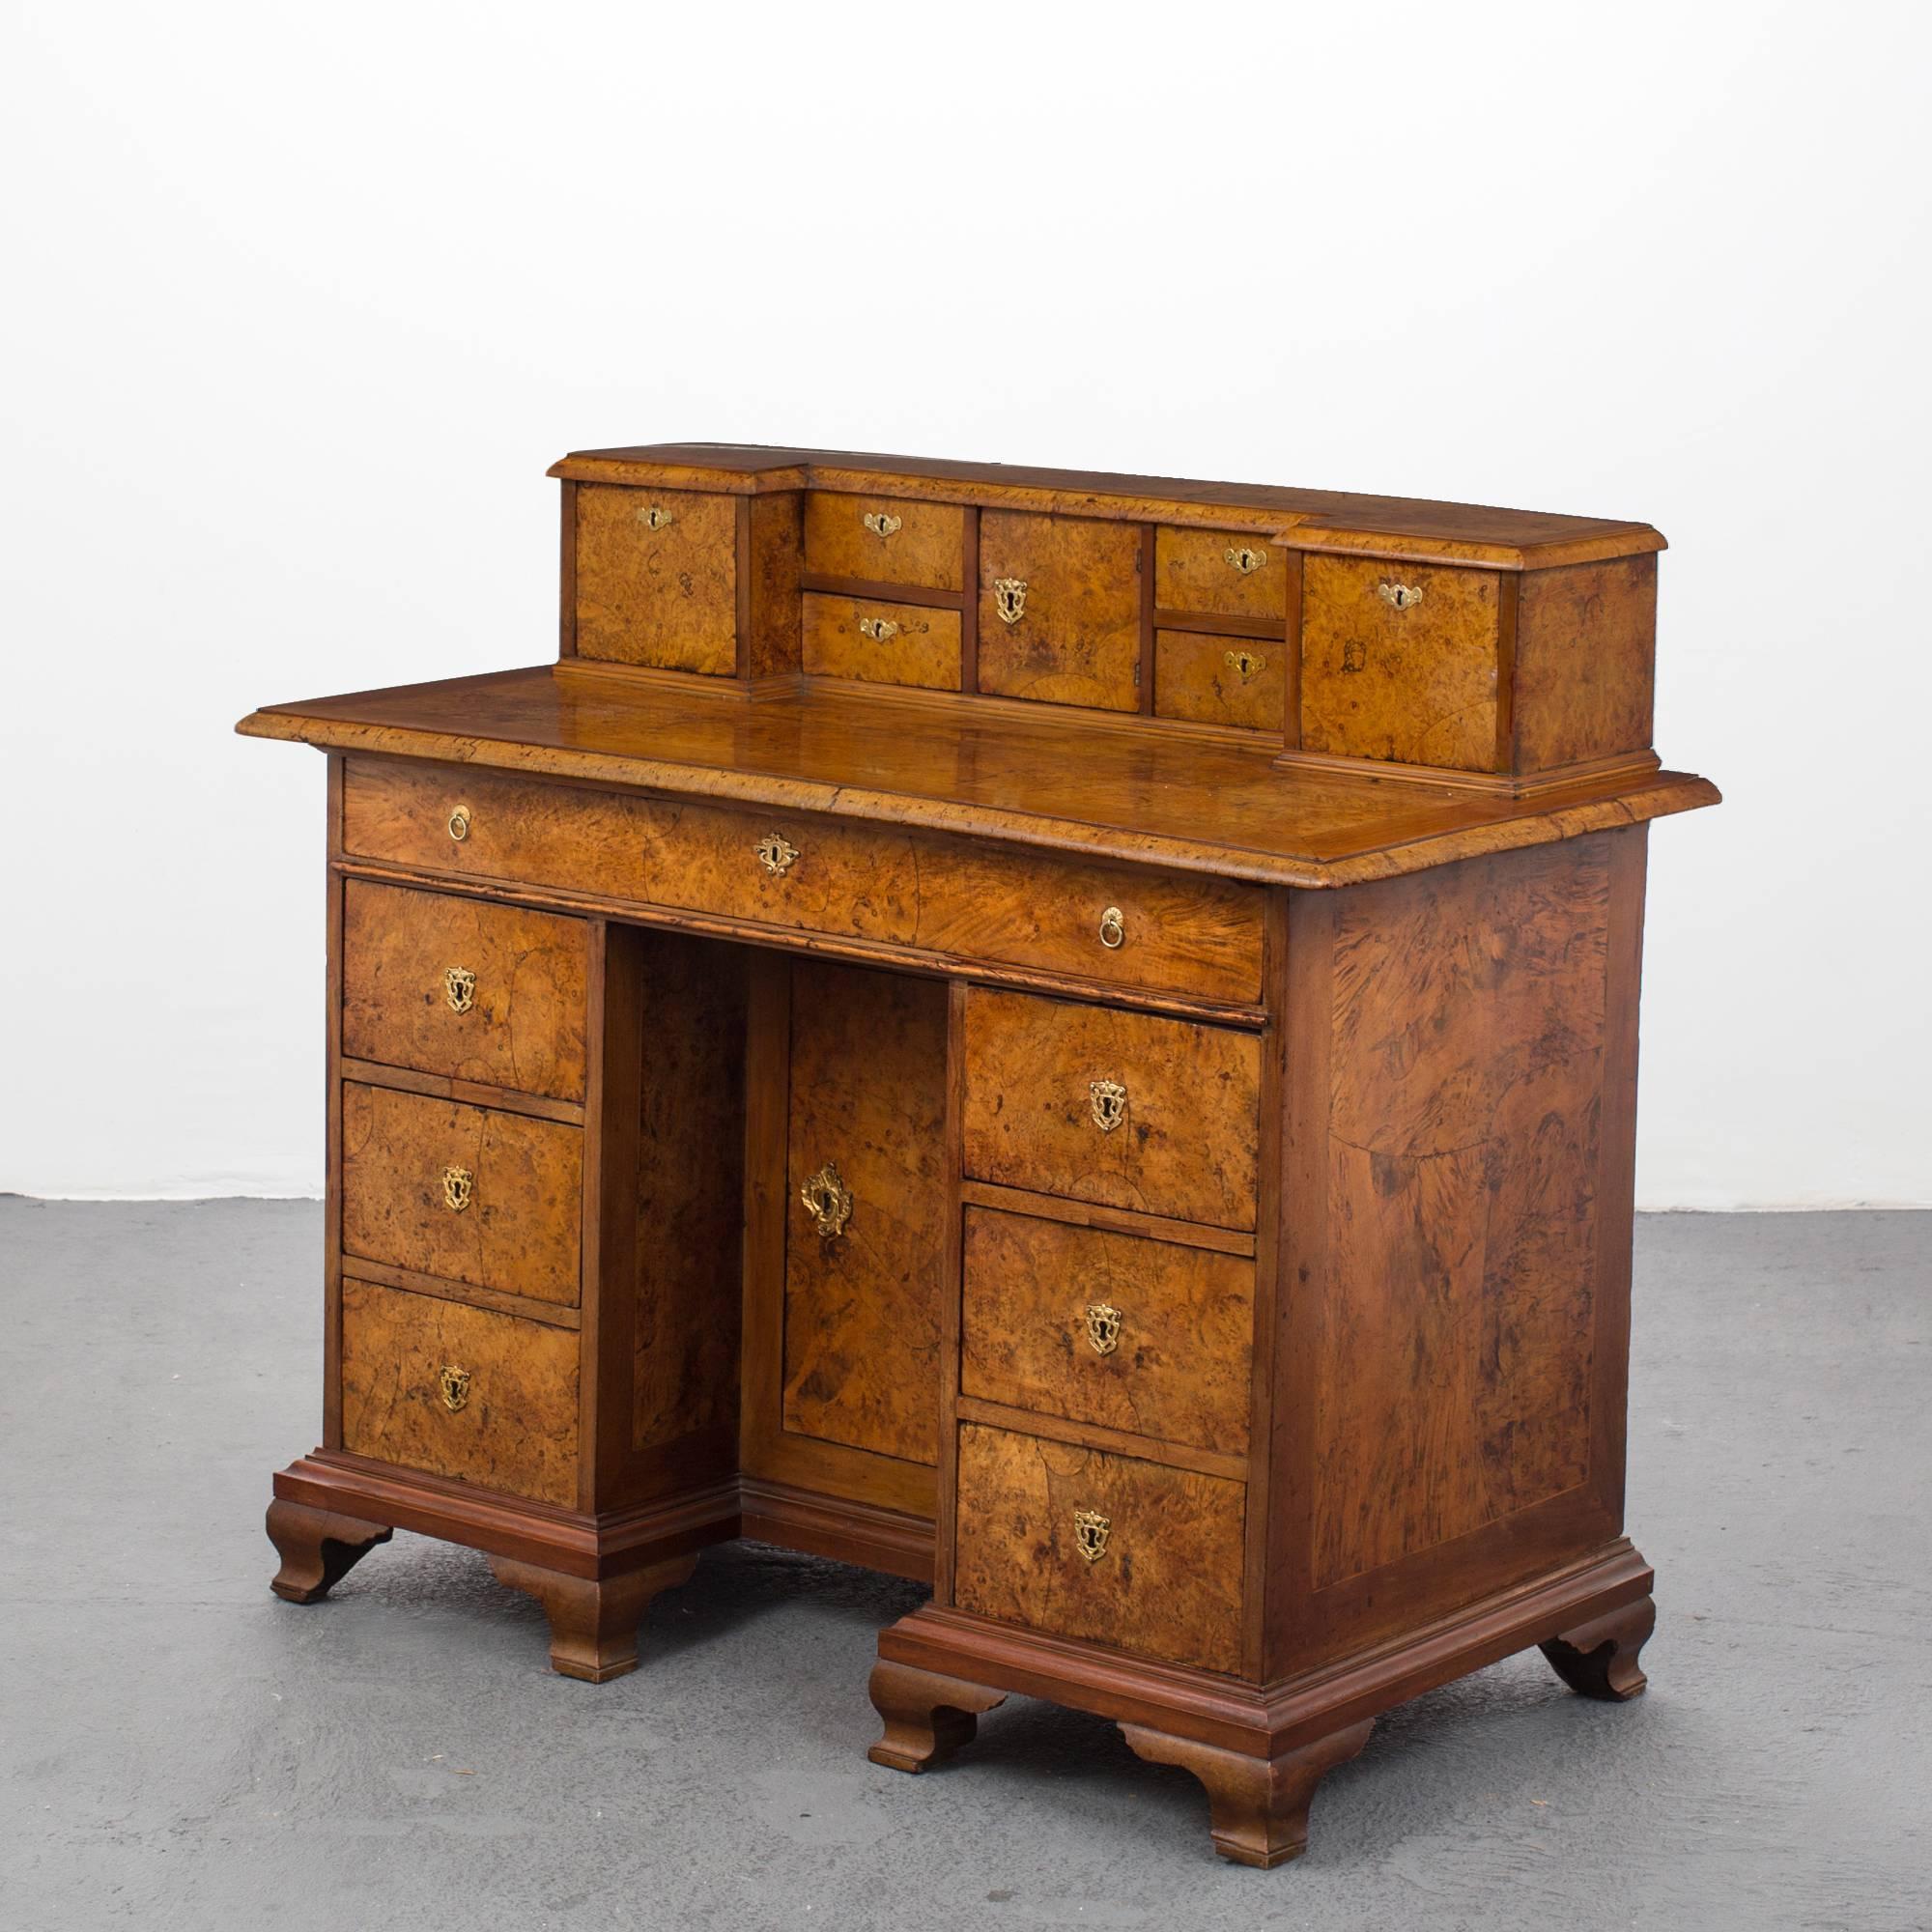 Desk Swedish Baroque Period 18th Century Veneer Sweden. A stunning desk made during the Baroque period in Sweden. Veneered with elm and burl wood. Brass hardware added later but not contemporary. Legs might not be original. 